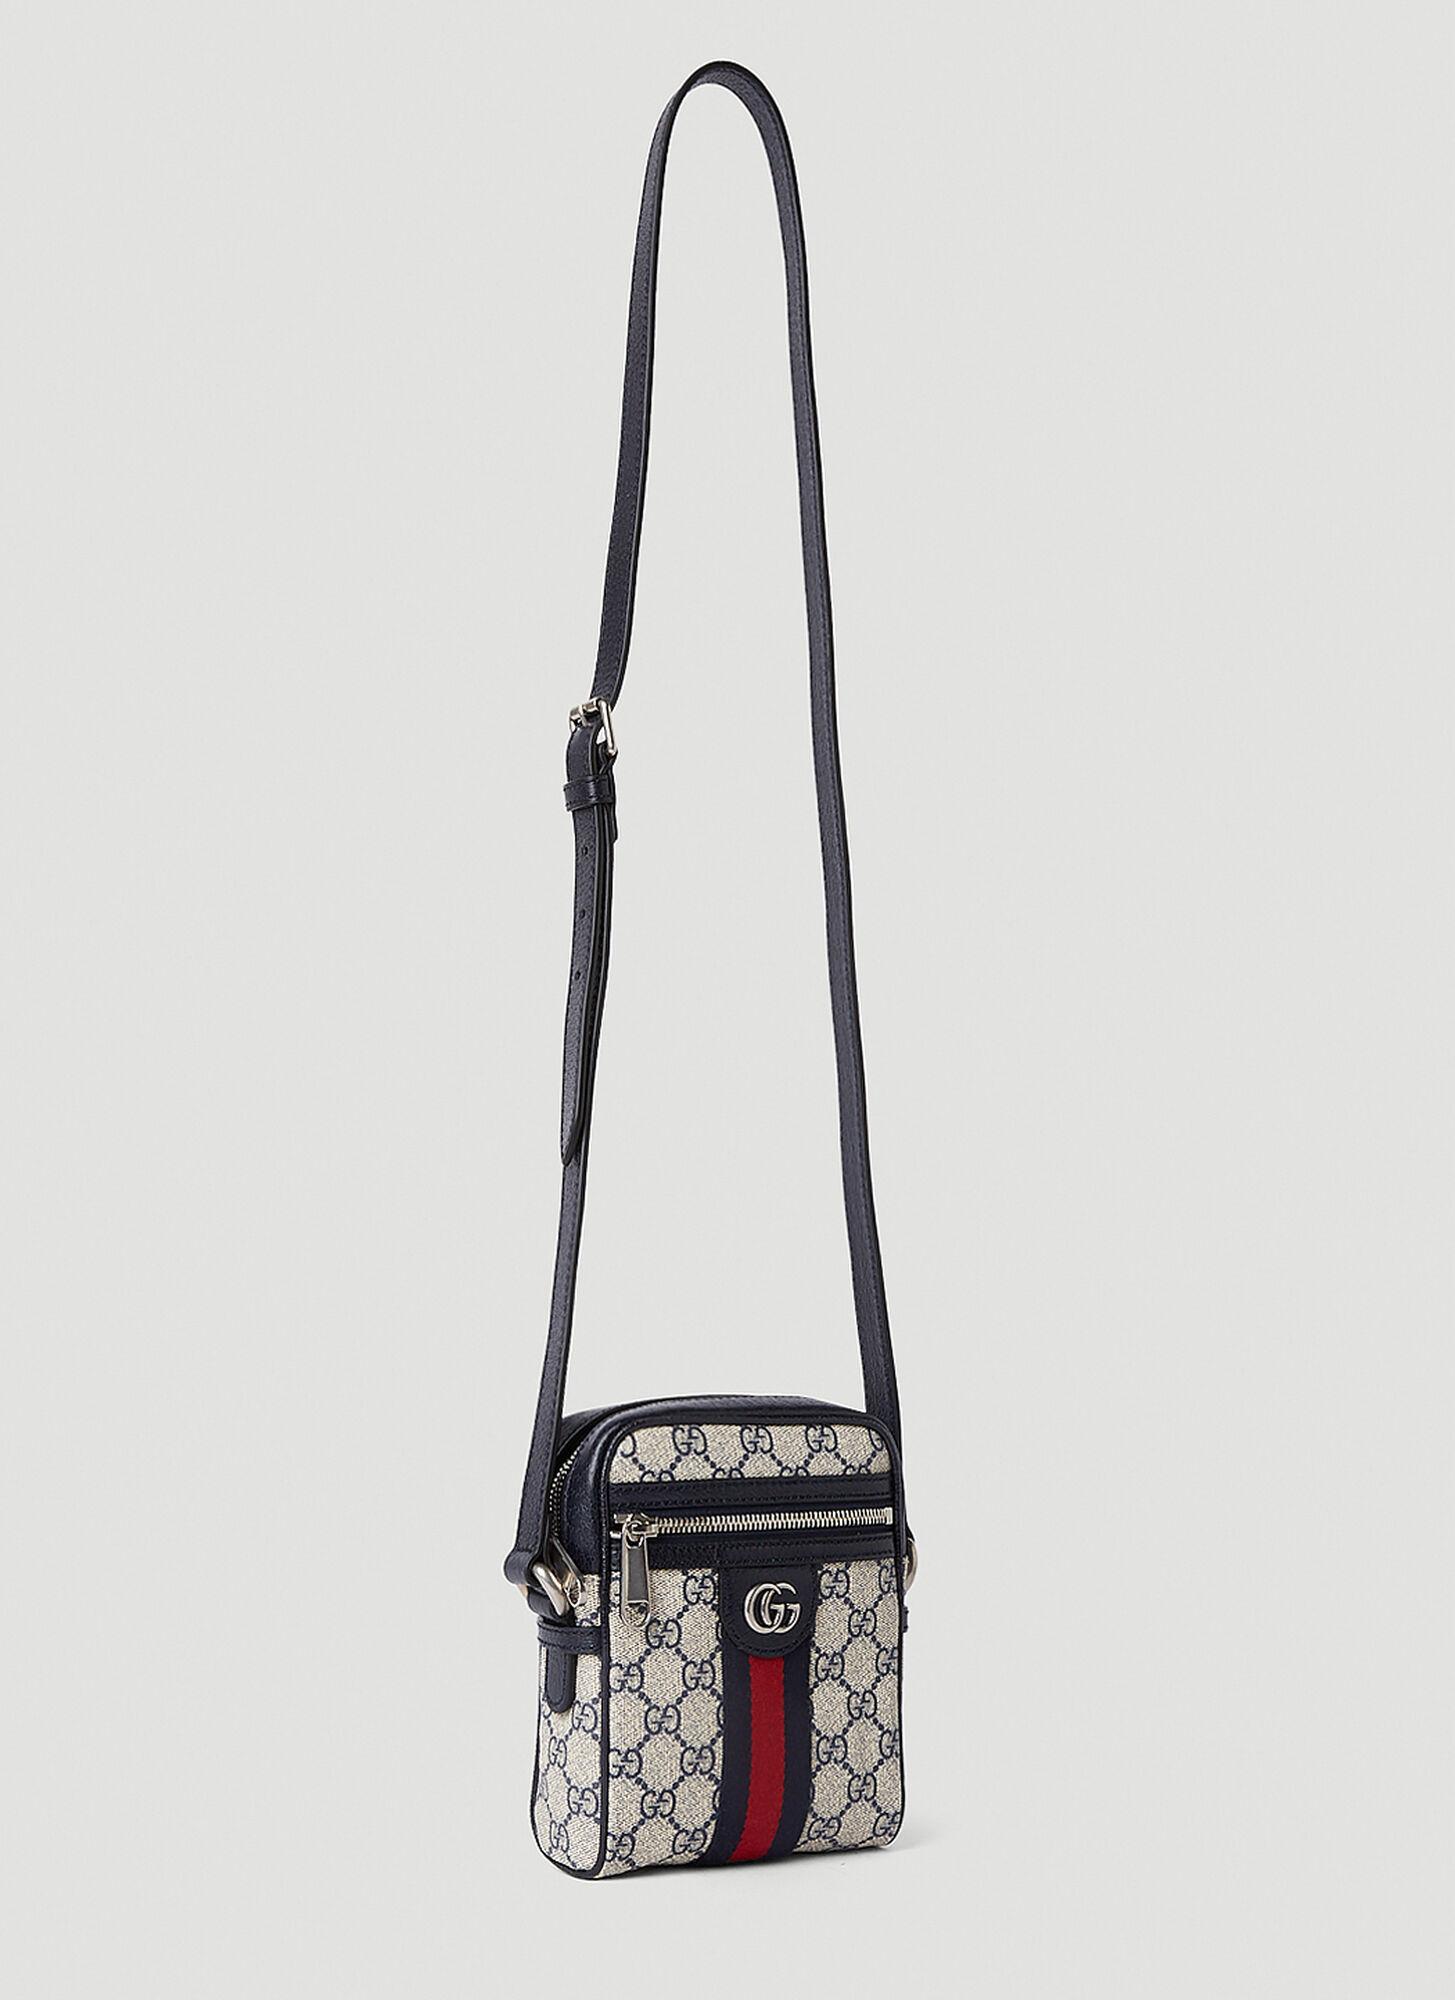 Ophidia small shoulder bag in grey and black Supreme